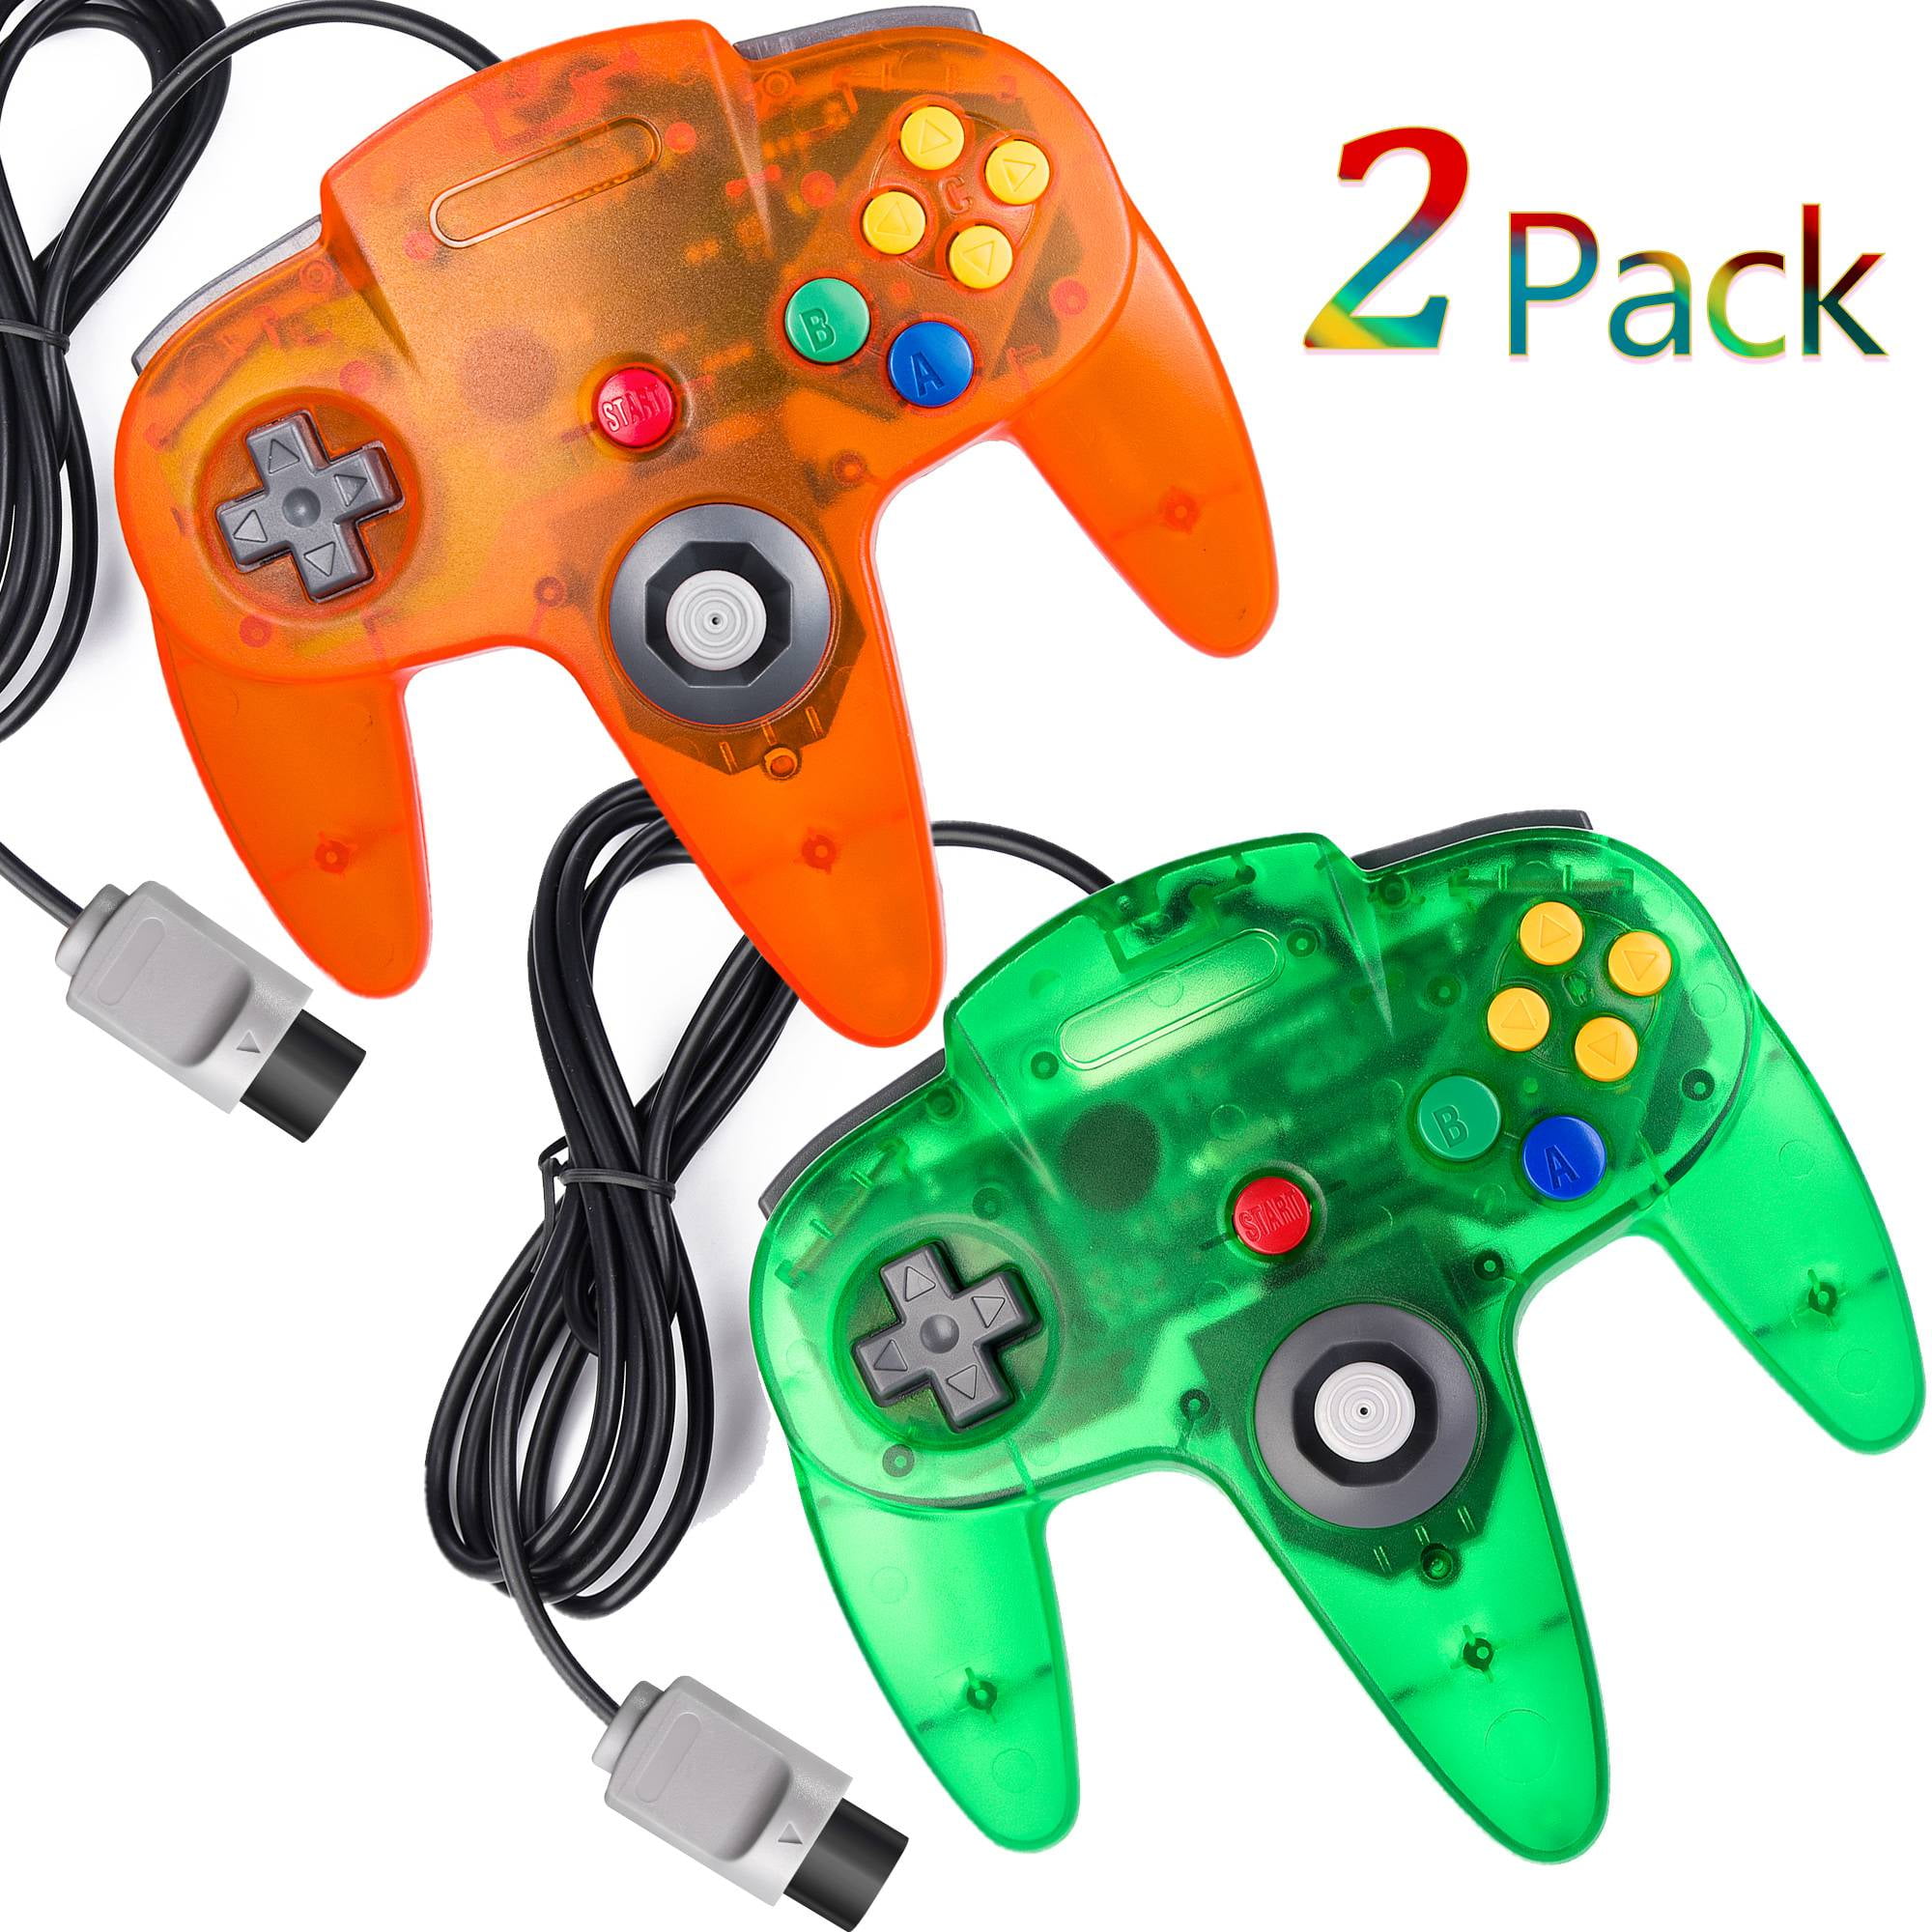 N64 Controller Luxmo 2pack Classic Retro Wired Controllers Gamepad Controller Joystick For N64 Console Video Games System Walmart Com Walmart Com - super mario 64 ps3 roblox